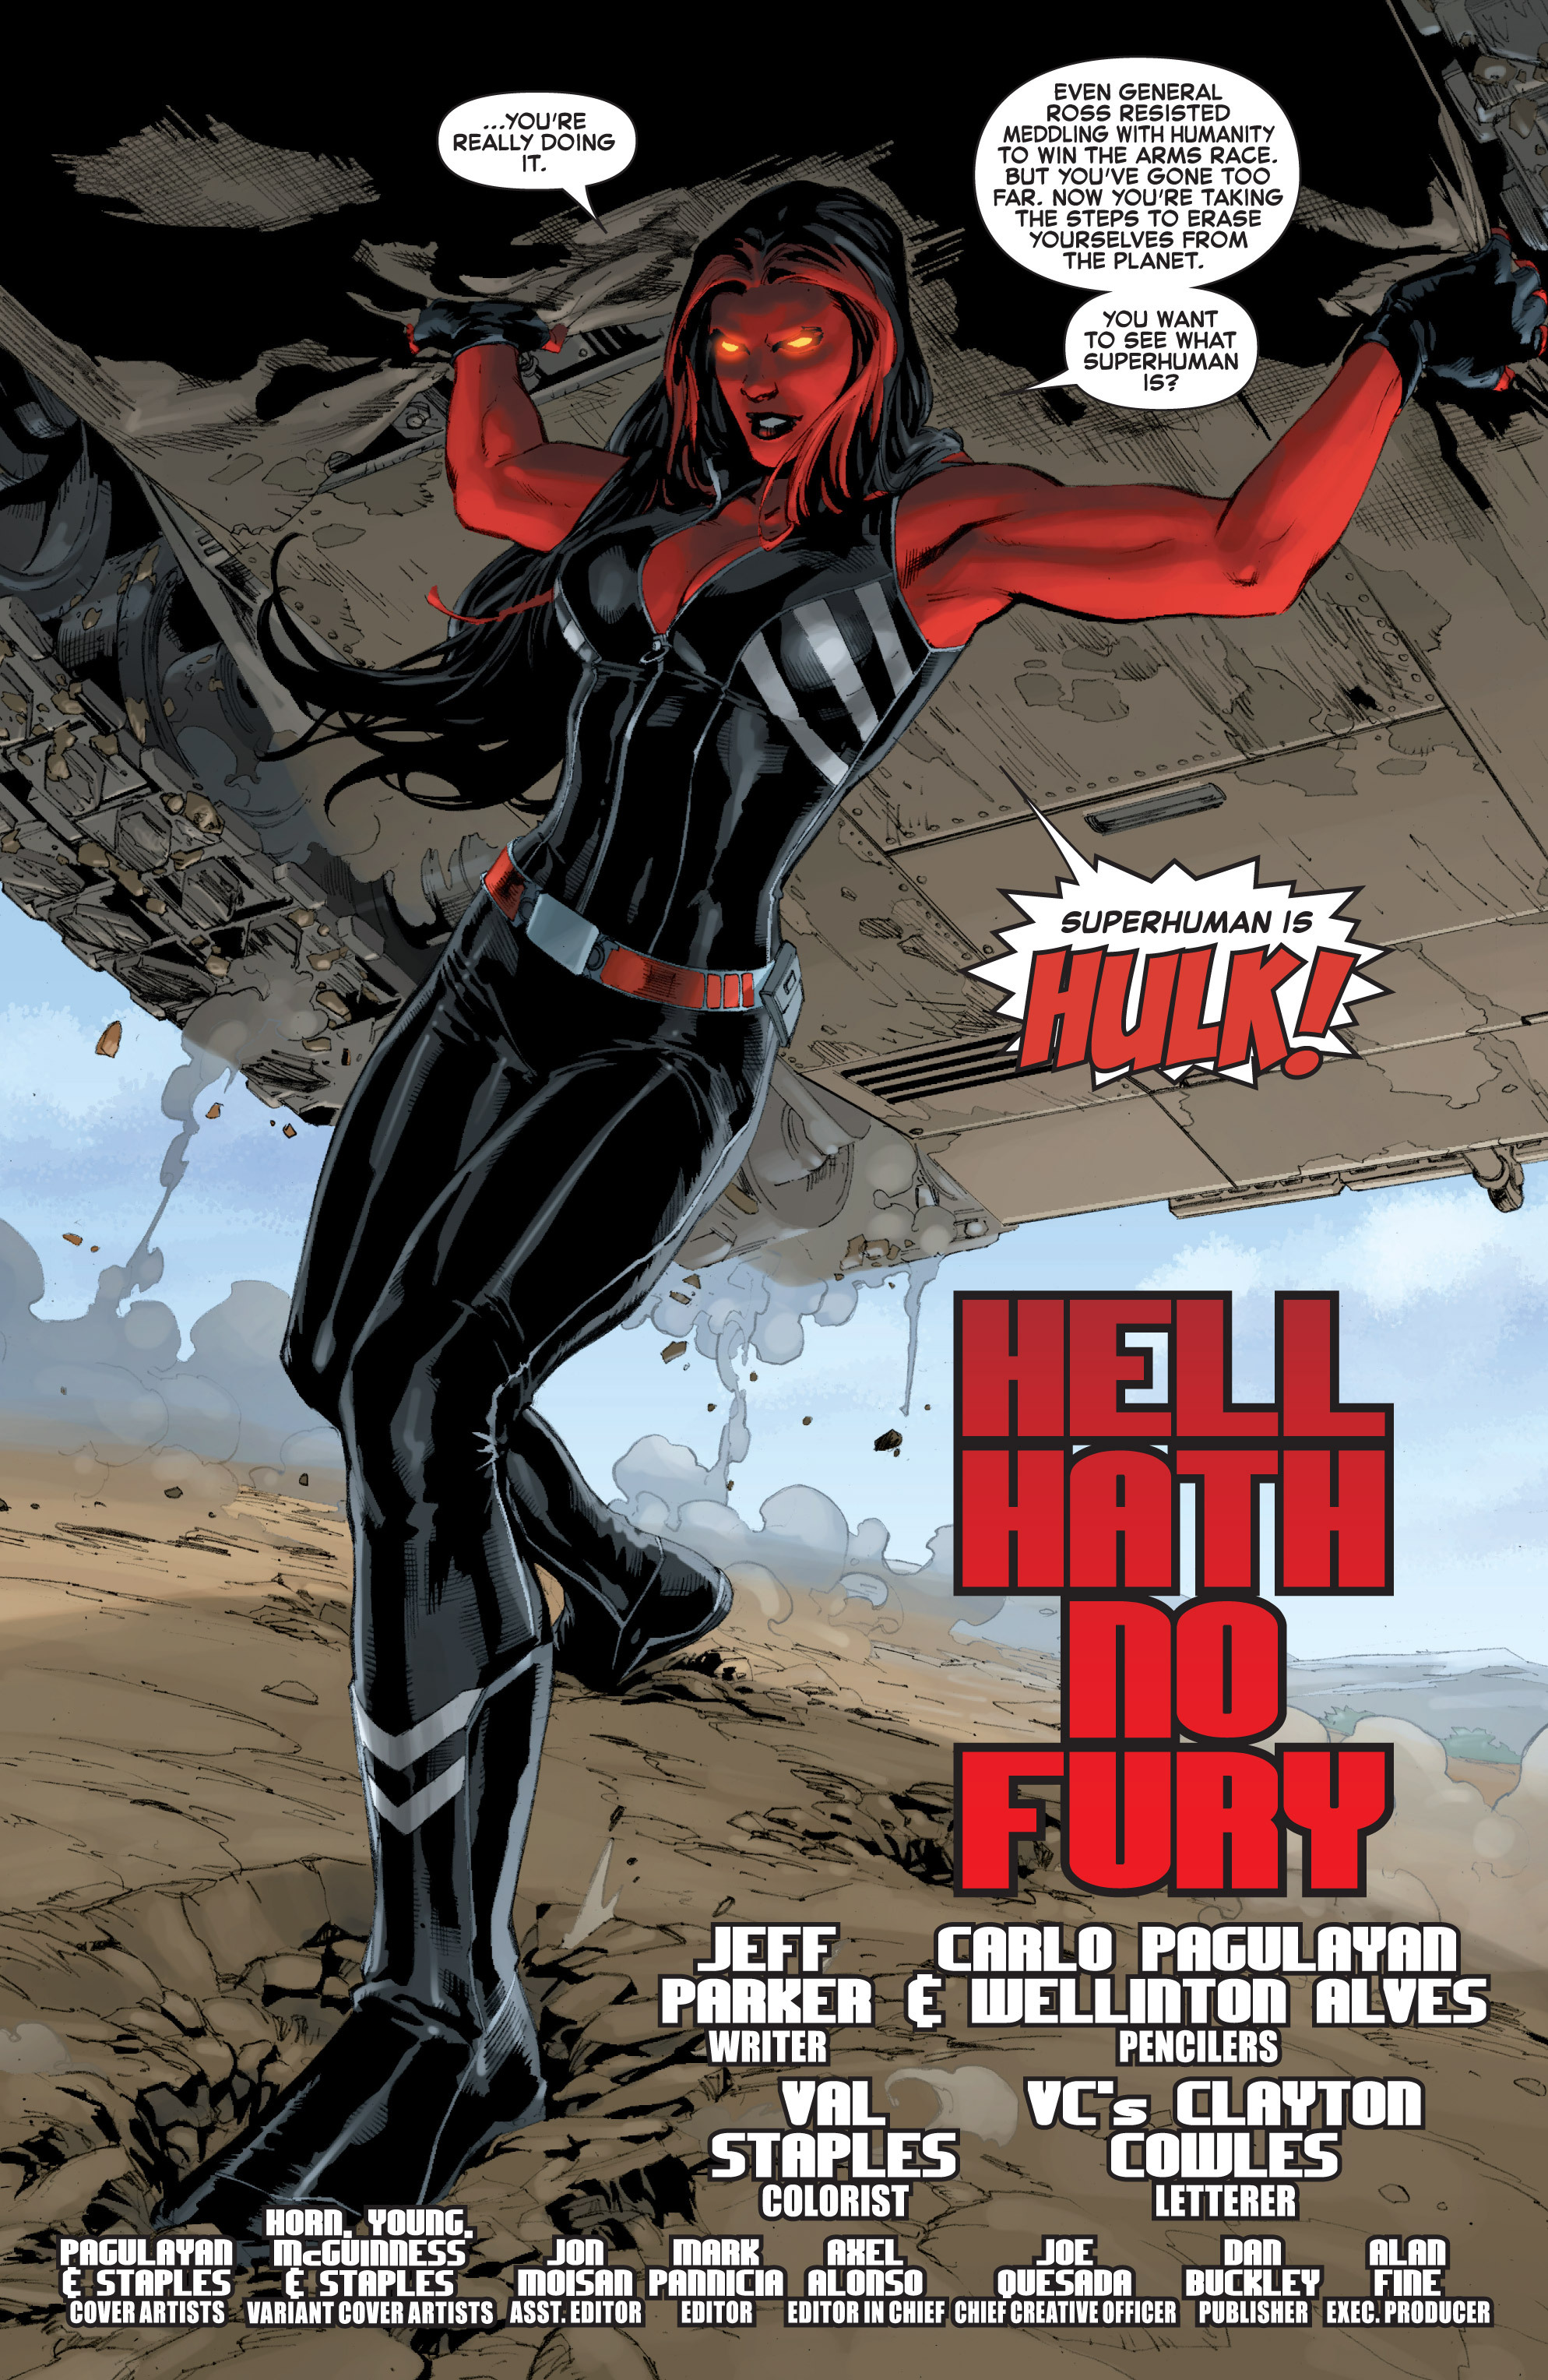 Red She-Hulk Issue #58 - Read Red She-Hulk Issue #58 Online Page 8 ...